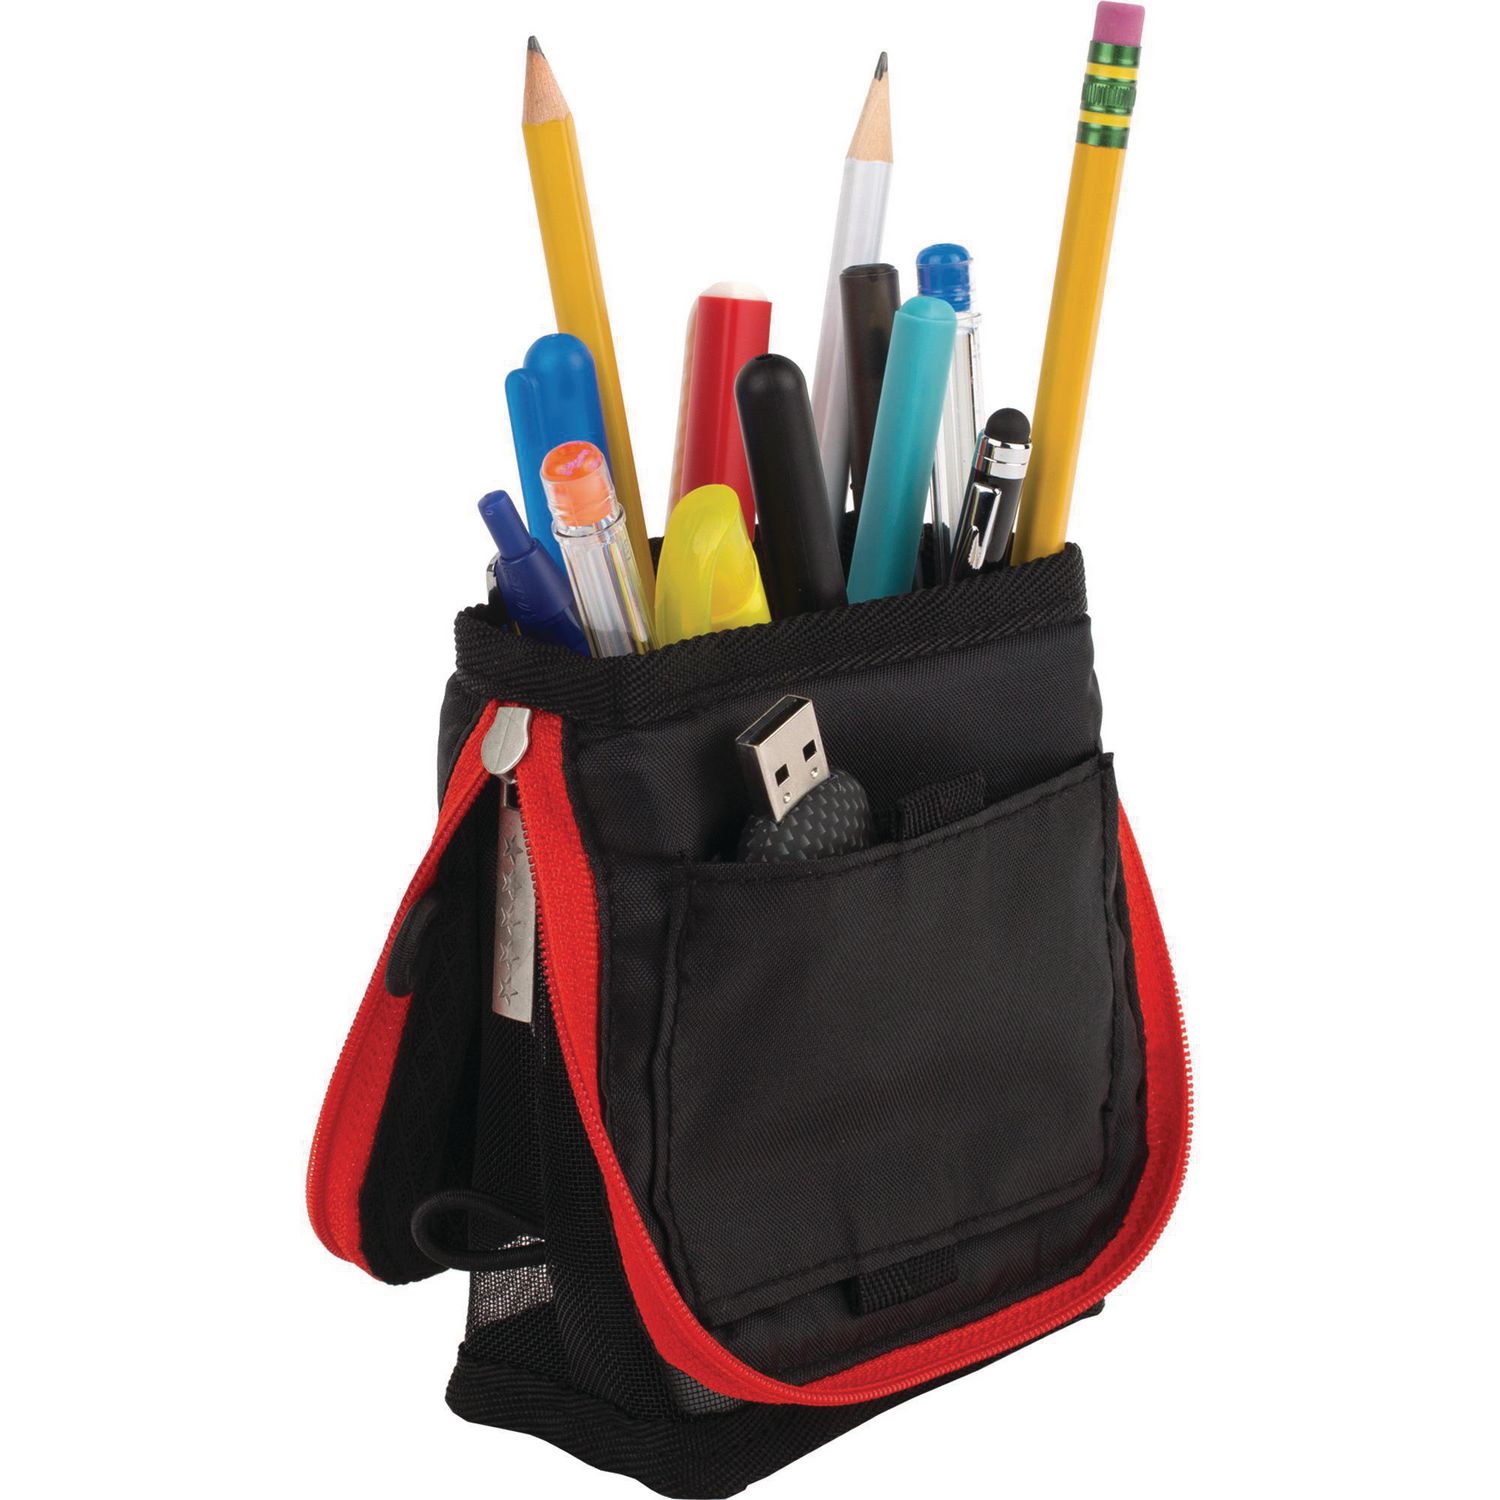 Five Star Pencil Pouch, Stand 'N Store